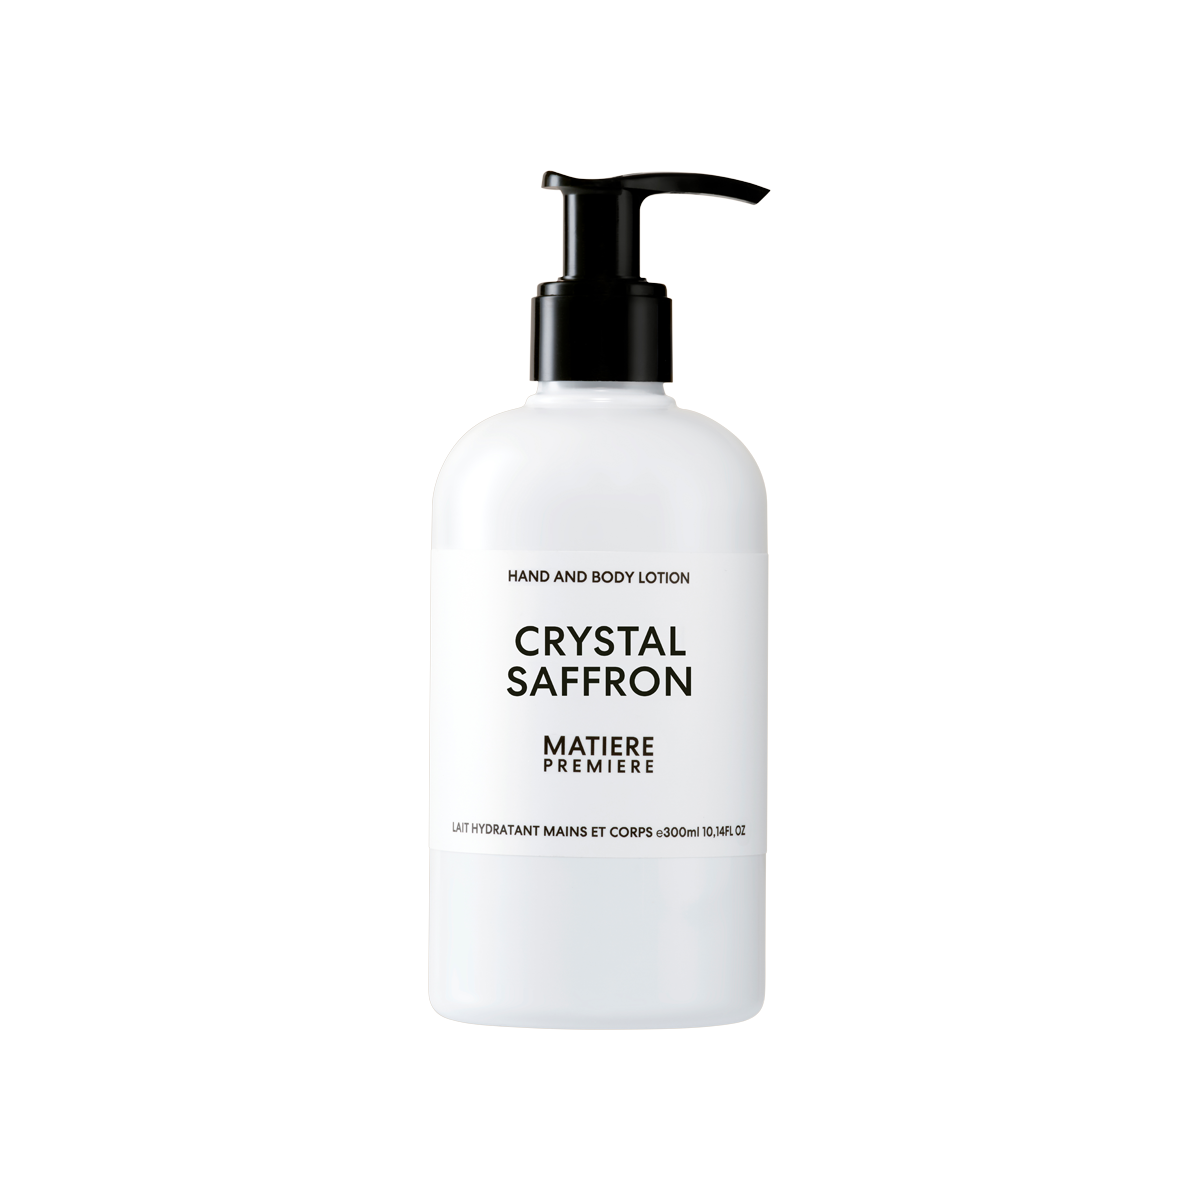 Matiere Premiere - Hand and body lotion Crystal Saffron